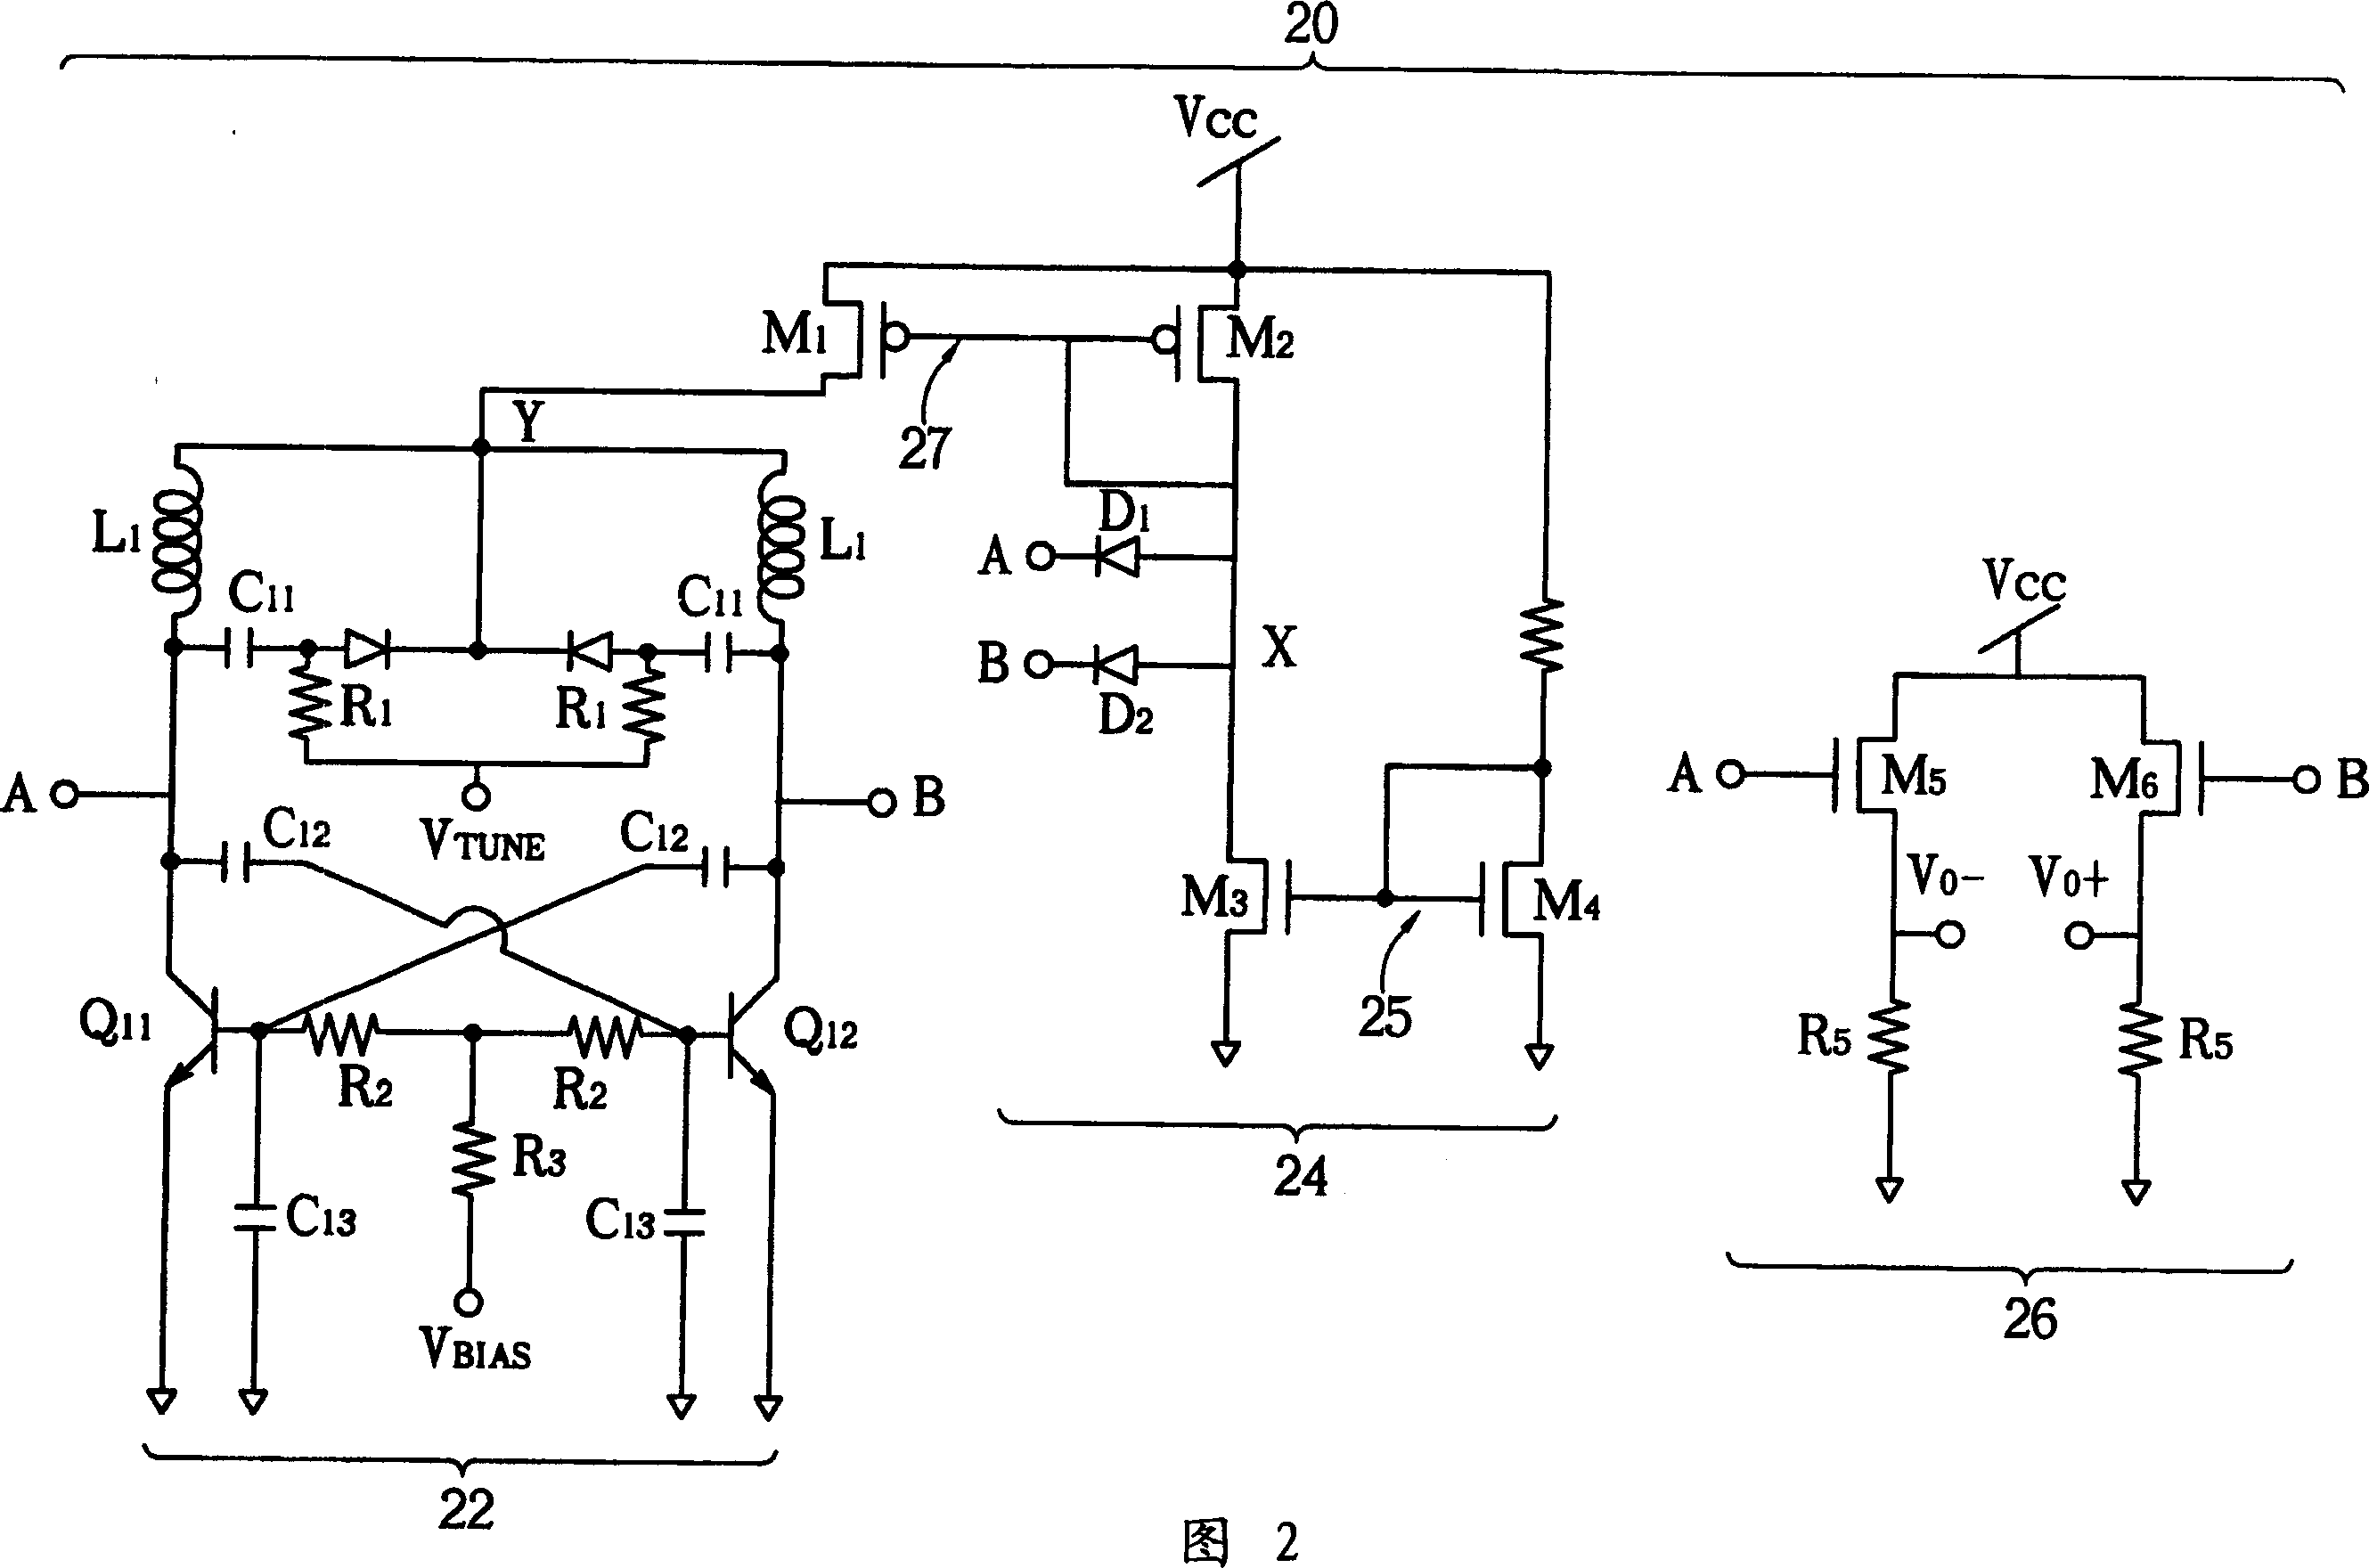 Voltage control oscillator with low phase noise